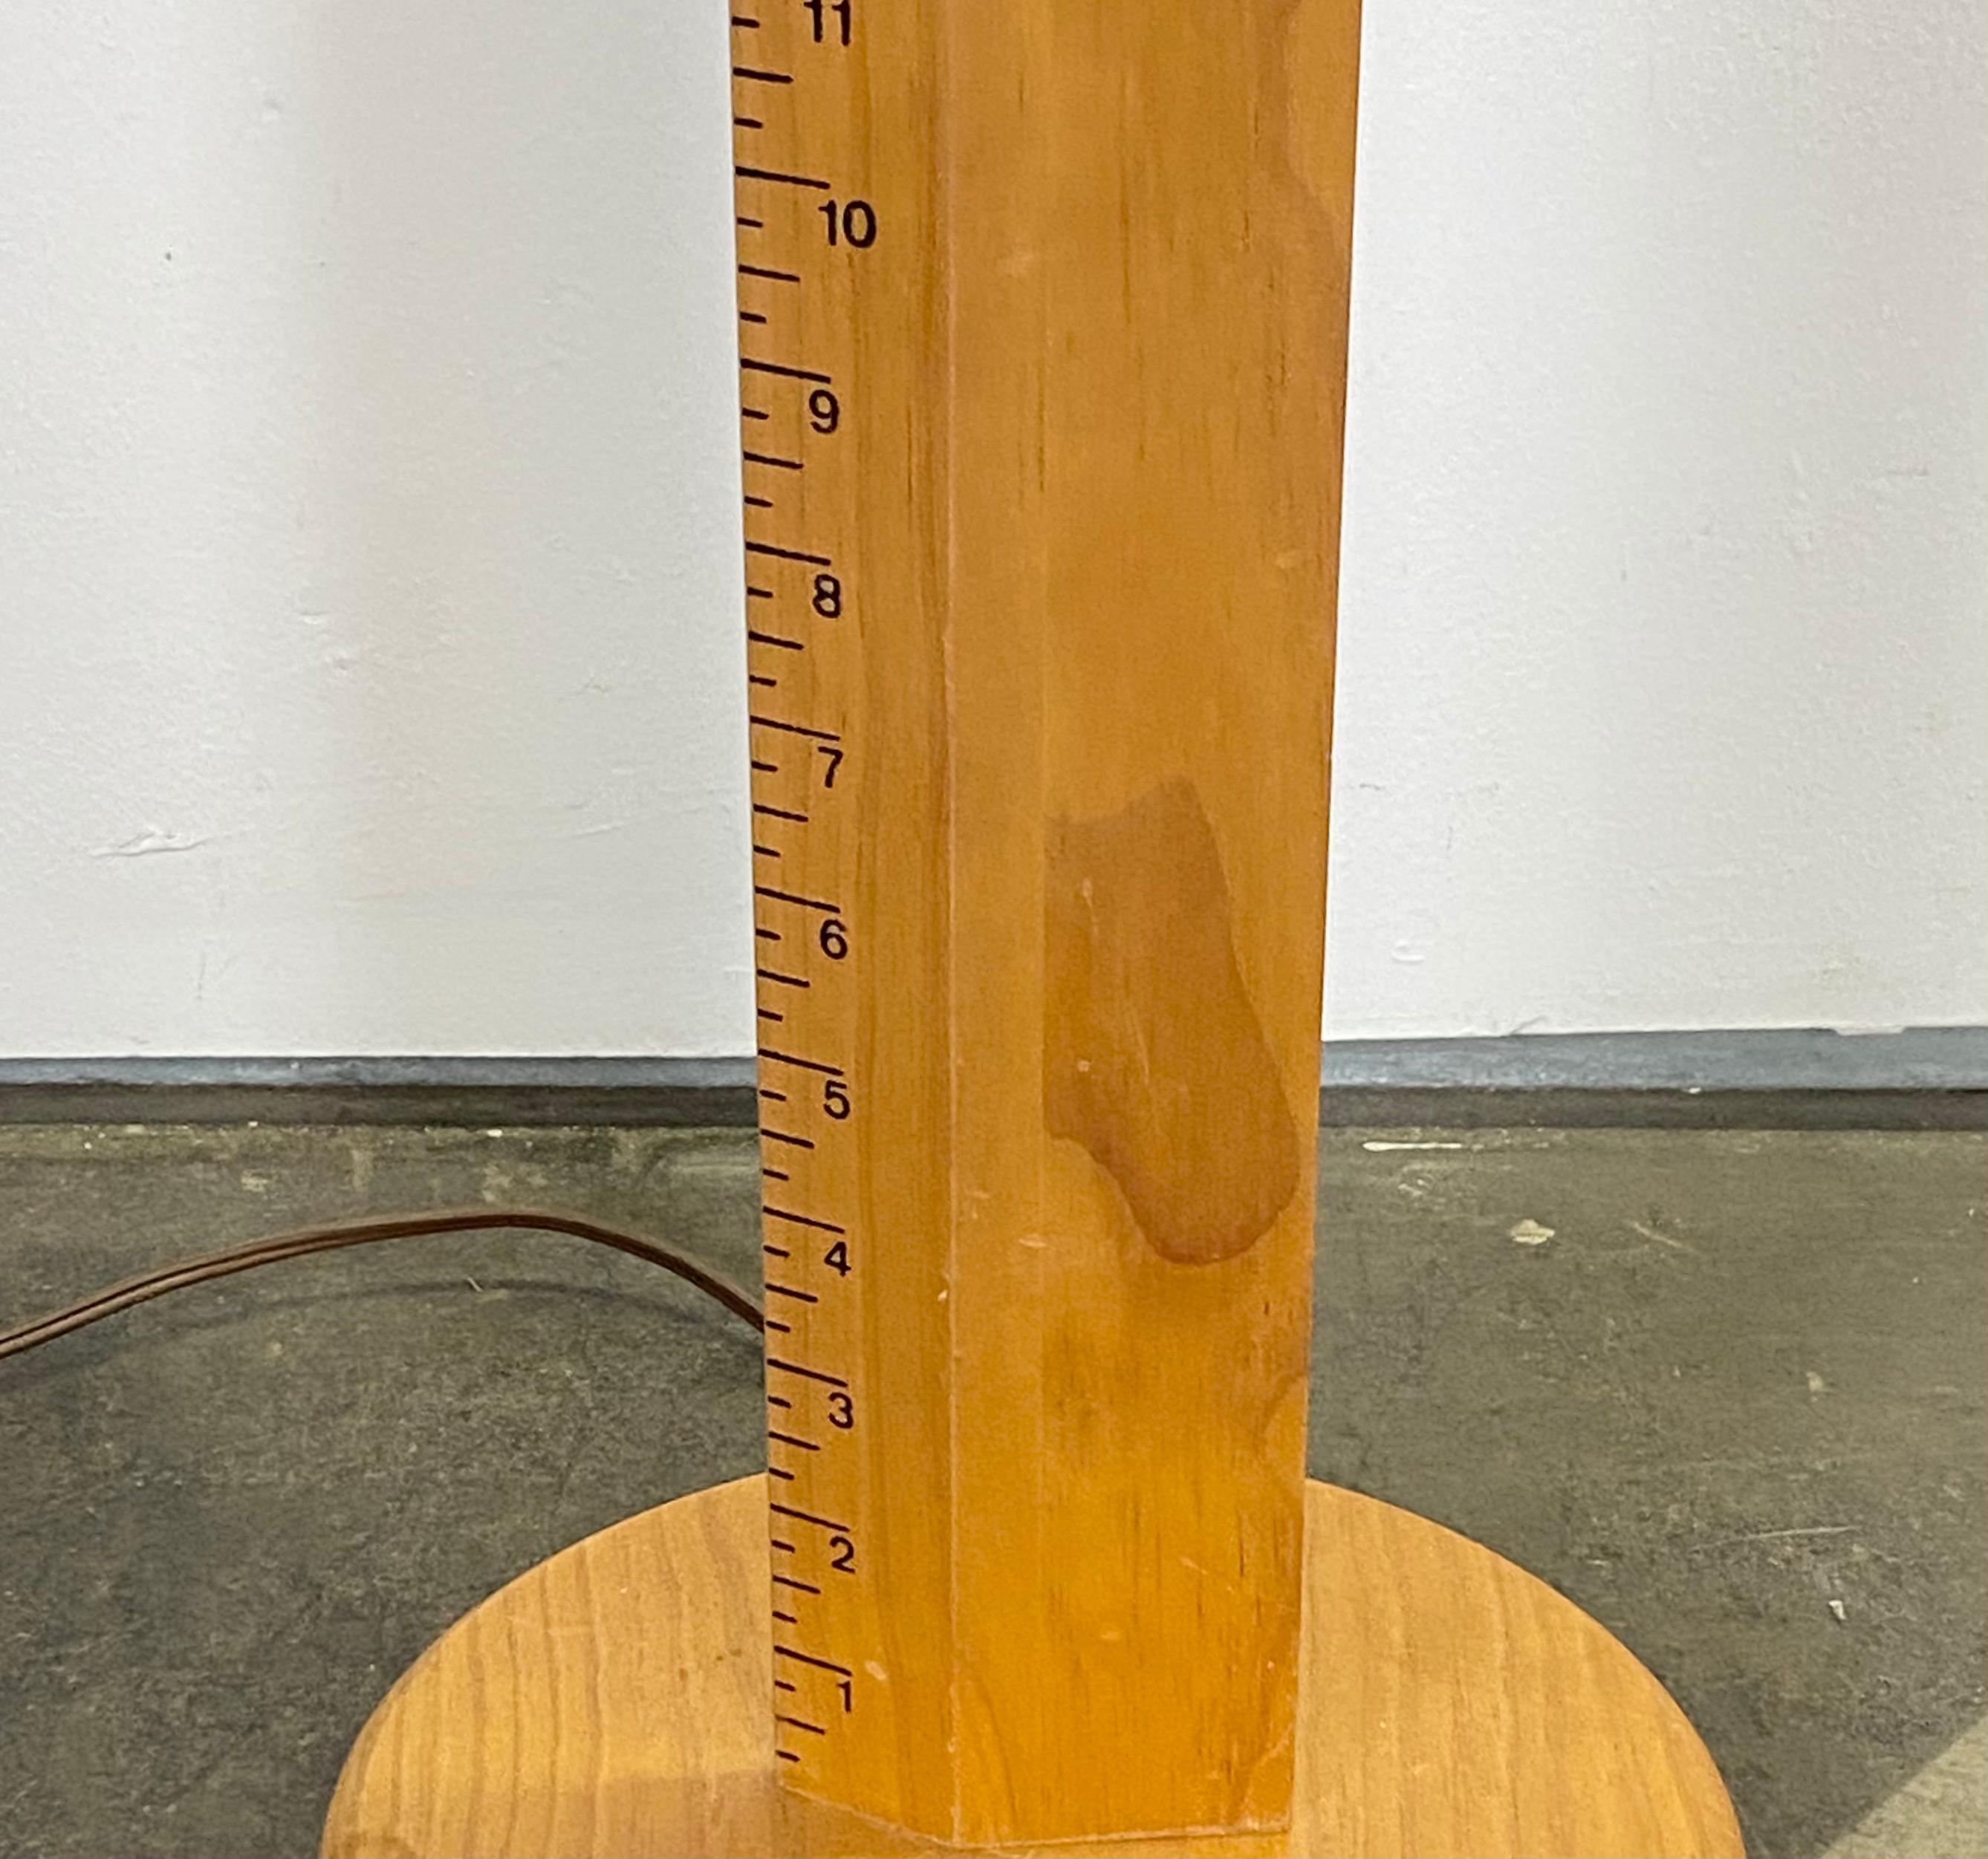 Cool and unique floor lamp with measuring stick. Appears to be made or ash wood with black interval markings. Works great and accommodates modern bulbs. Outfitted with brand new shade. Motif makes it a cool lamp for the study or workshop, or perhaps